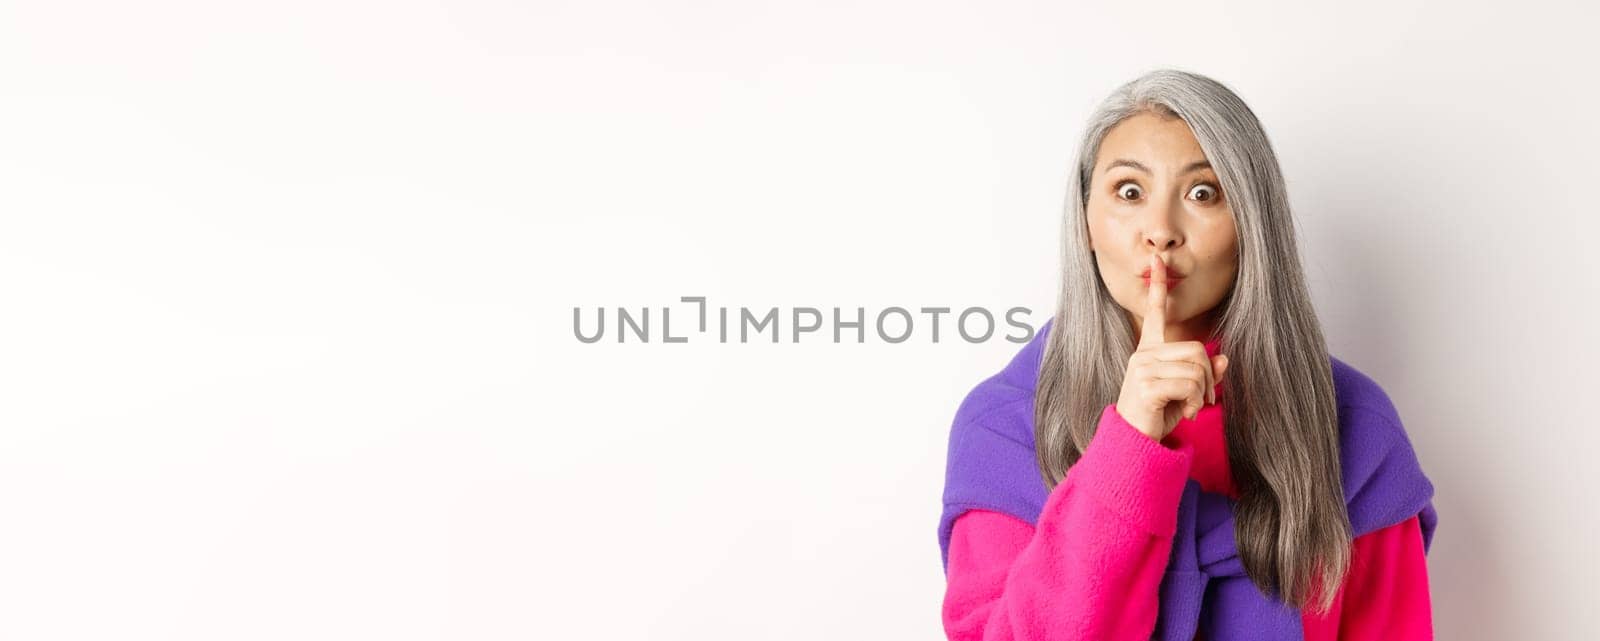 Close-up of stylish senior asian woman in hipster outfit telling hush, shushing at looking at camera, show taboo gesture, standing over white background.